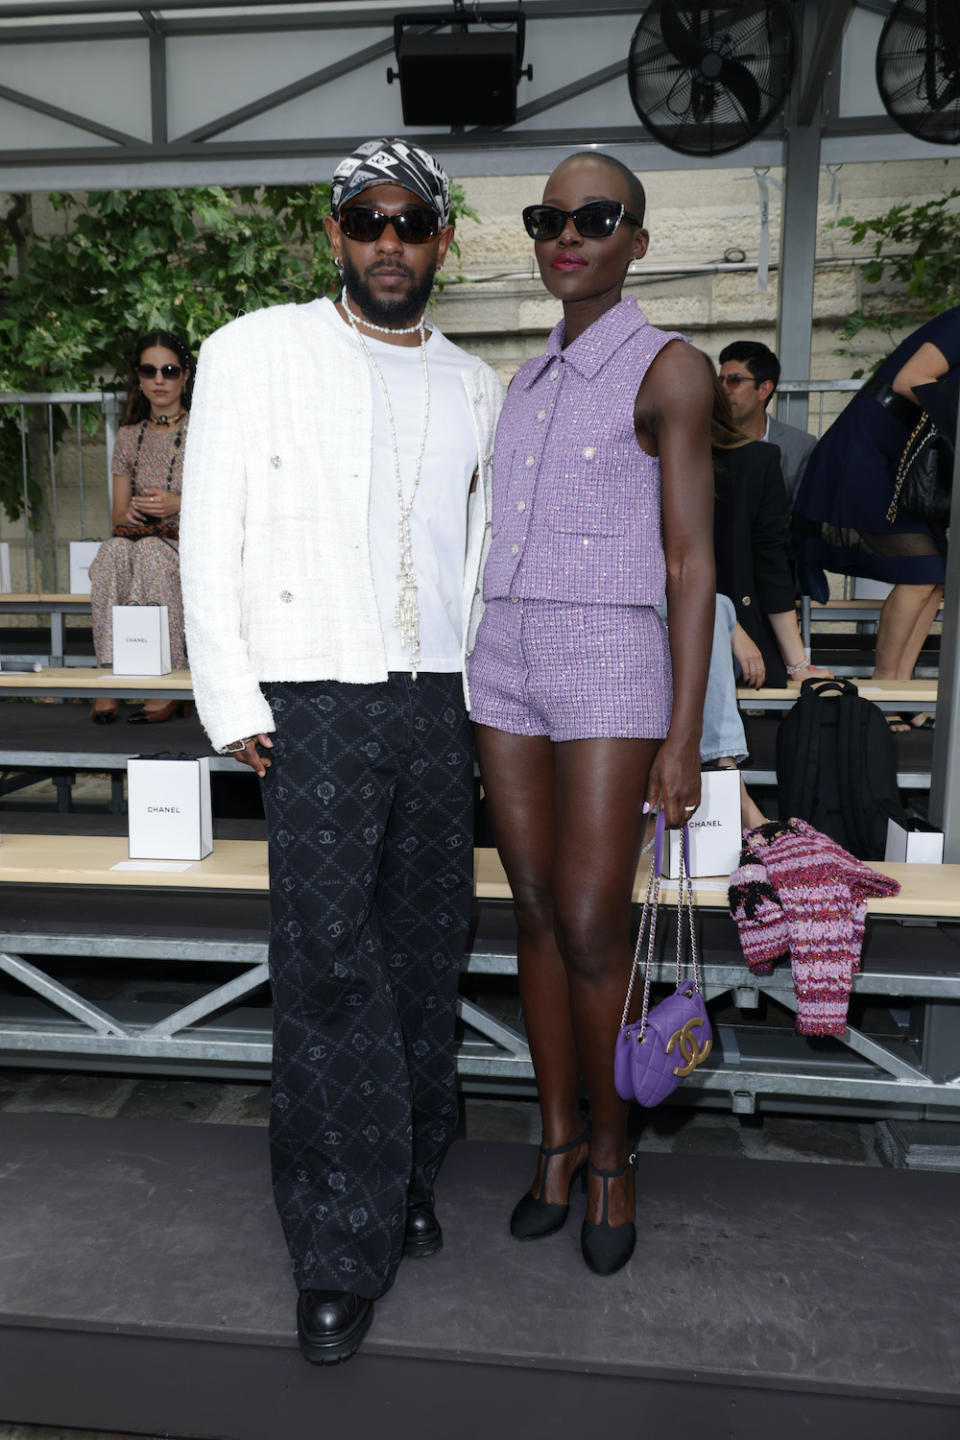 PARIS, FRANCE - JULY 04: (EDITORIAL USE ONLY - For Non-Editorial use please seek approval from Fashion House) Kendrick Lamar and Lupita Nyong'o attend the Chanel Haute Couture Fall/Winter 2023/2024 show as part of Paris Fashion Week  on July 04, 2023 in Paris, France. (Photo by Pascal Le Segretain/Getty Images)